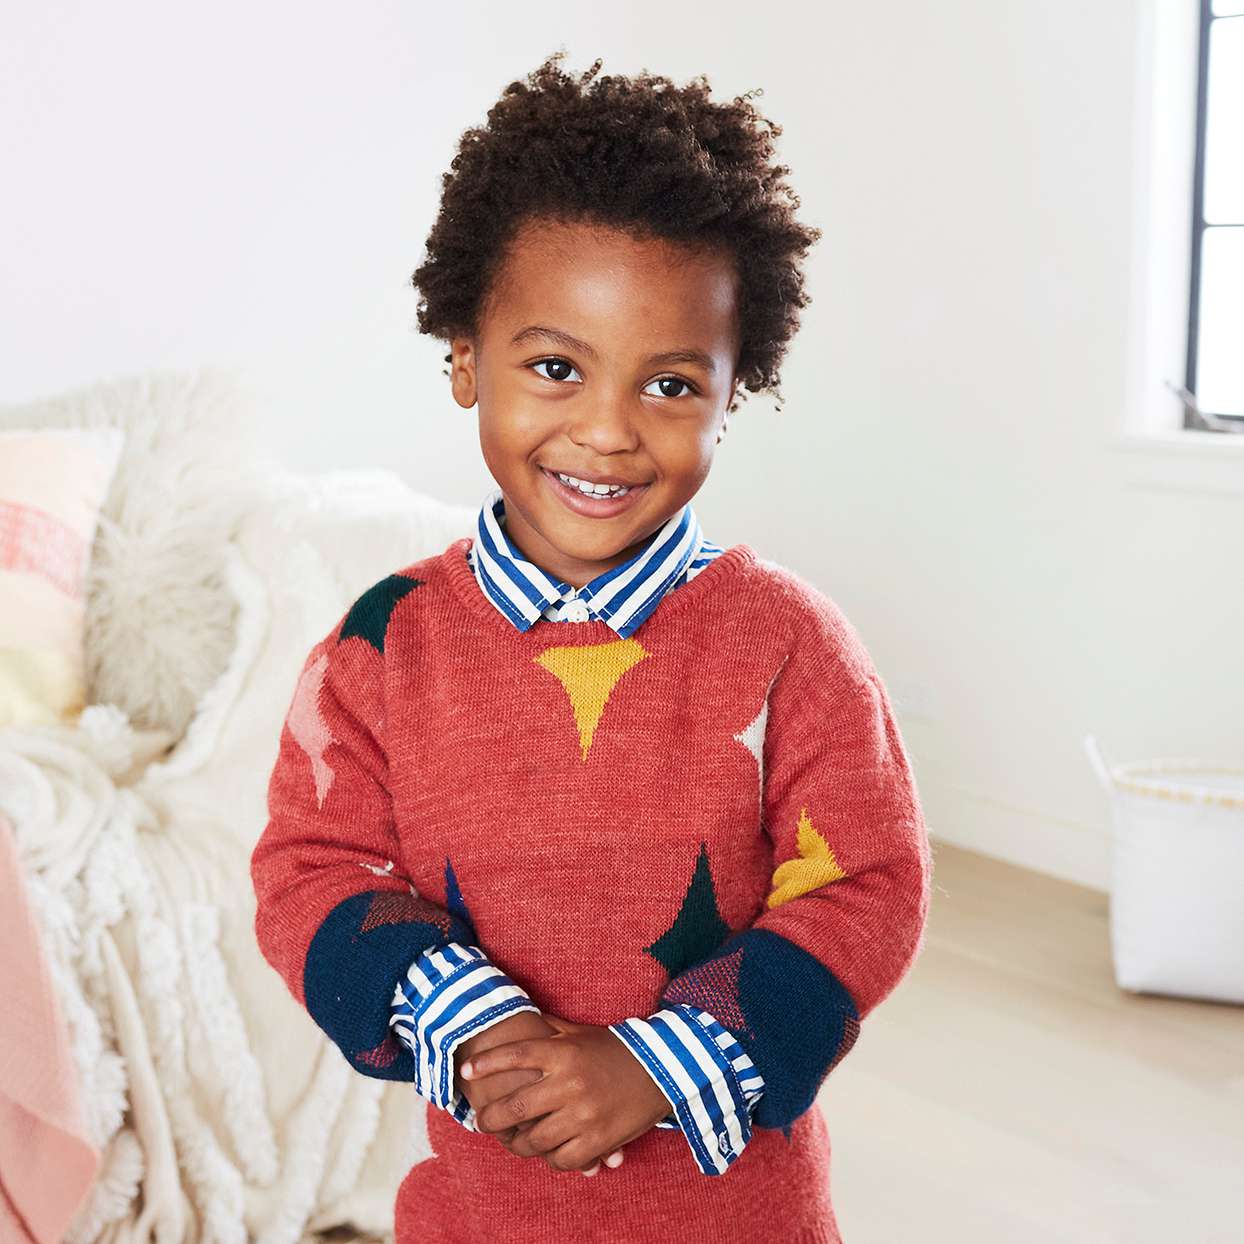 young boy smiling red sweater bedroom